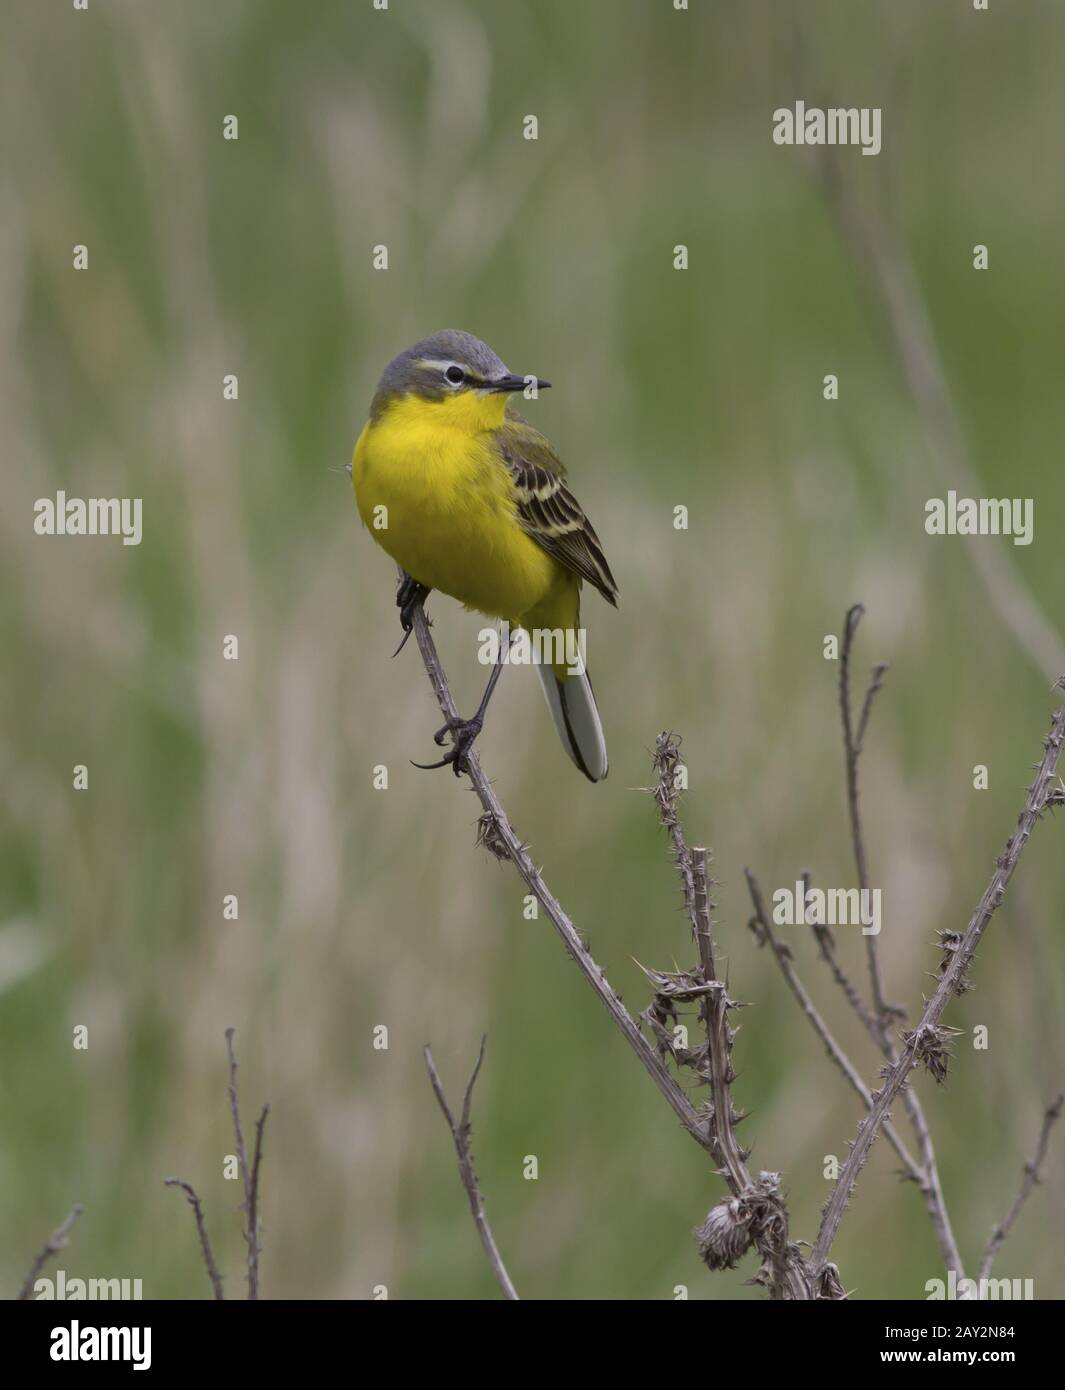 Male yellow wagtail sitting on a dead branch of grass. Stock Photo